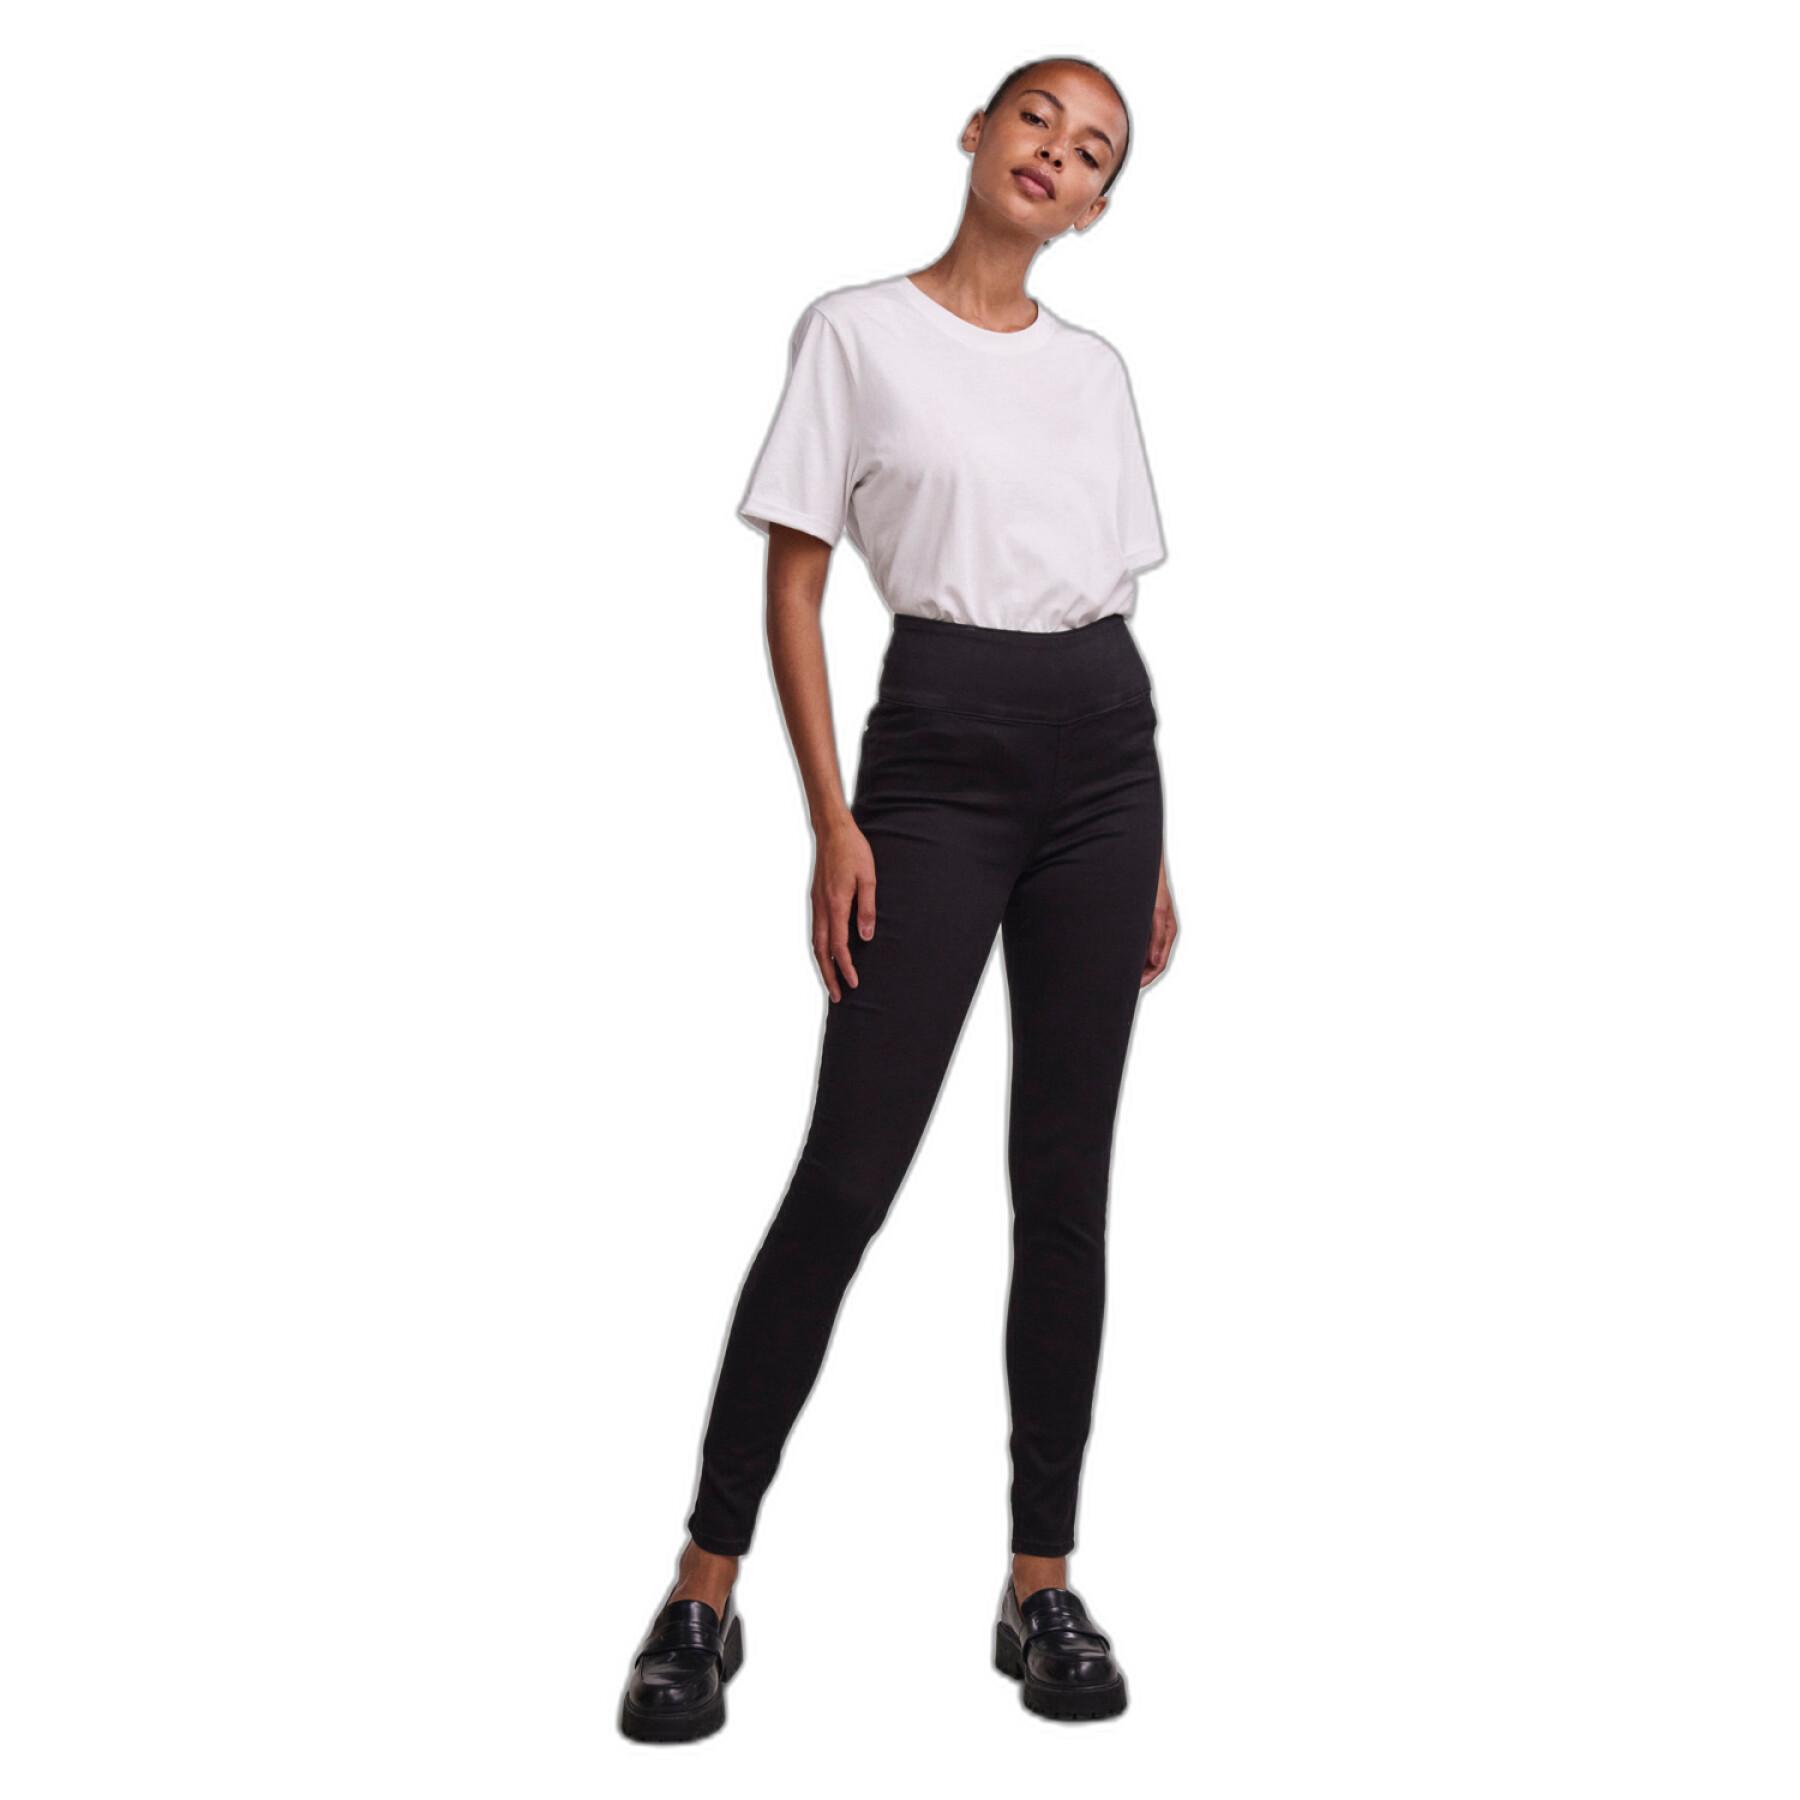 Women's high-waisted soft jegging Pieces